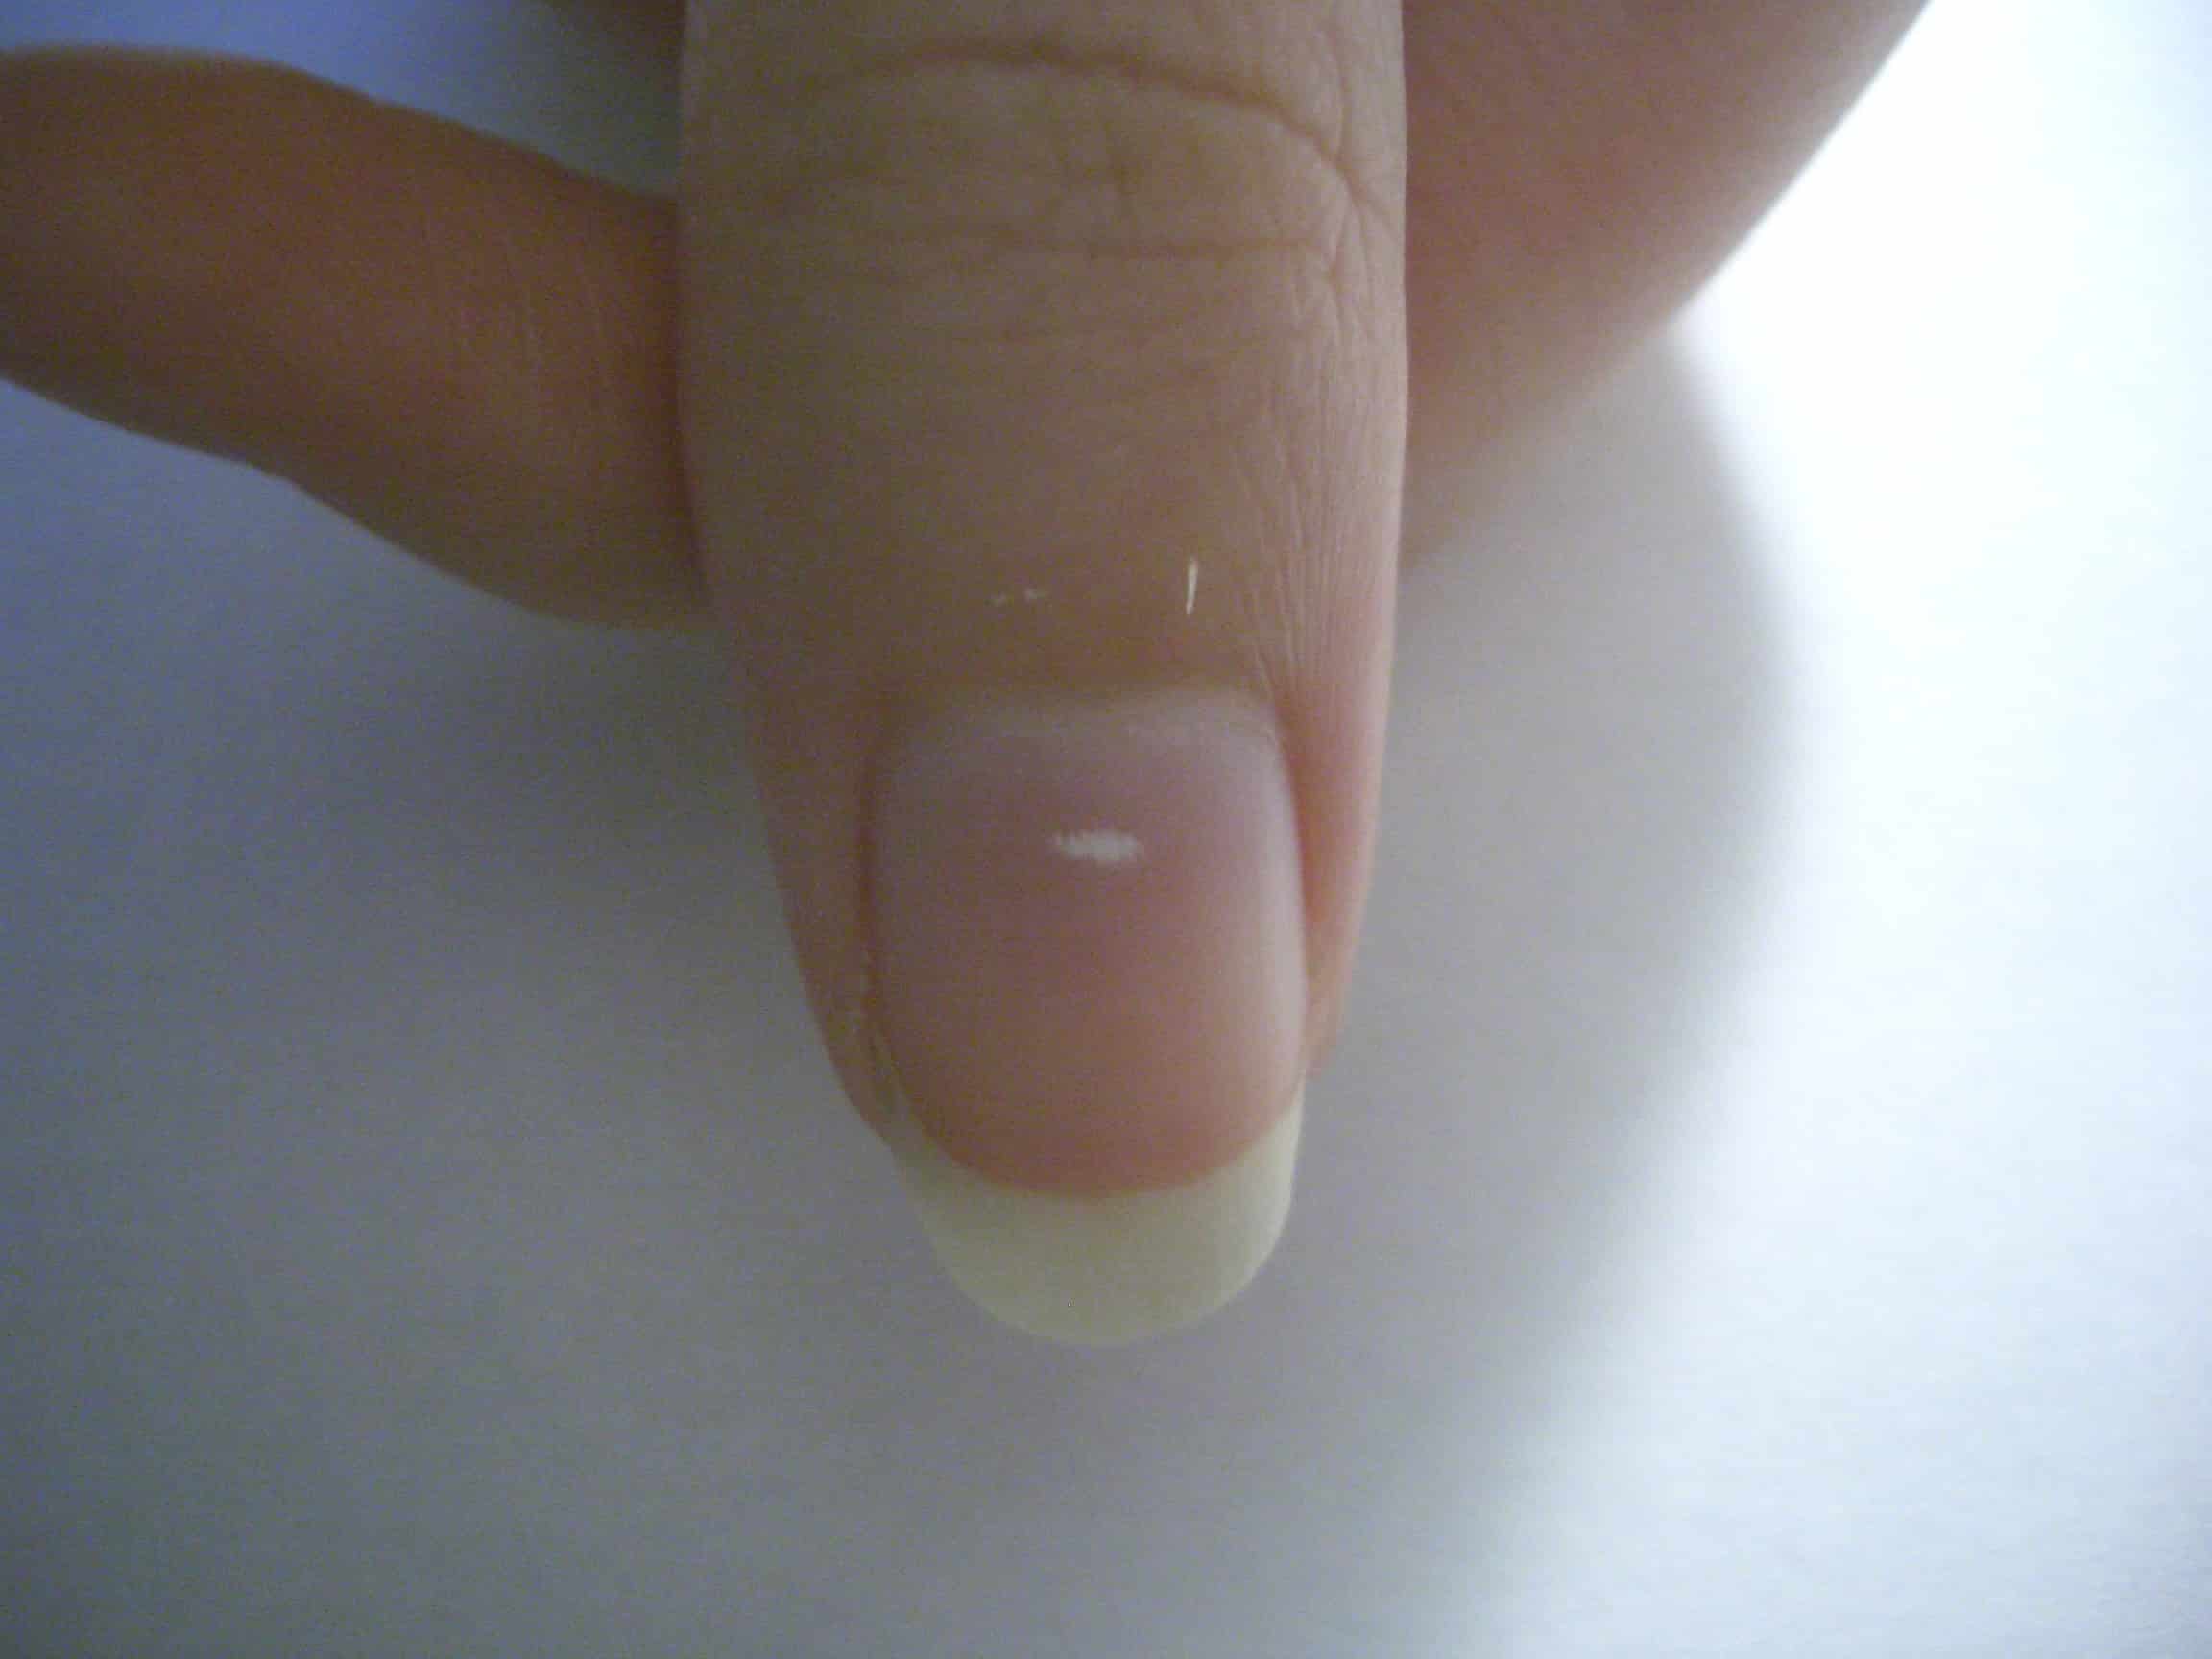 The Truth Behind the White Spots on Nails